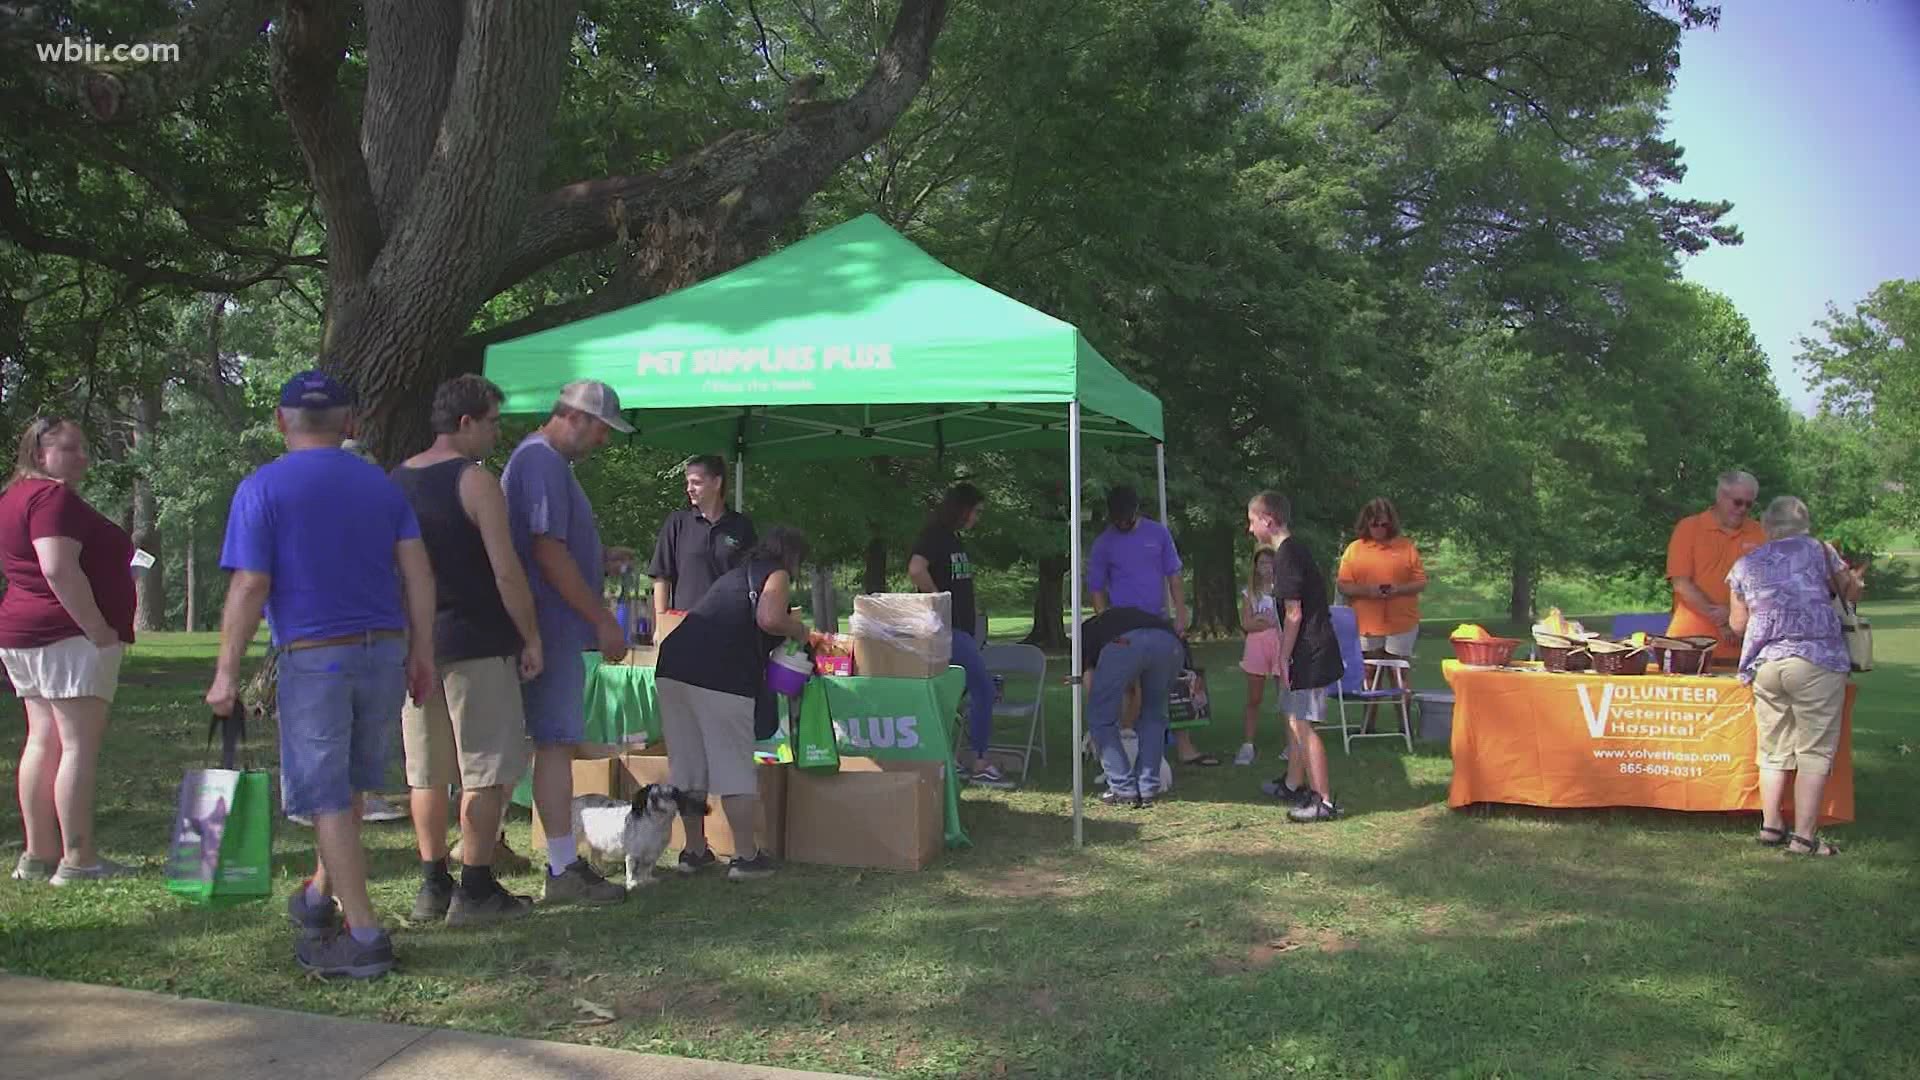 PetPalooza kicked off at Springbrook Park Saturday afternoon, offering fun for families and their four-legged friends.